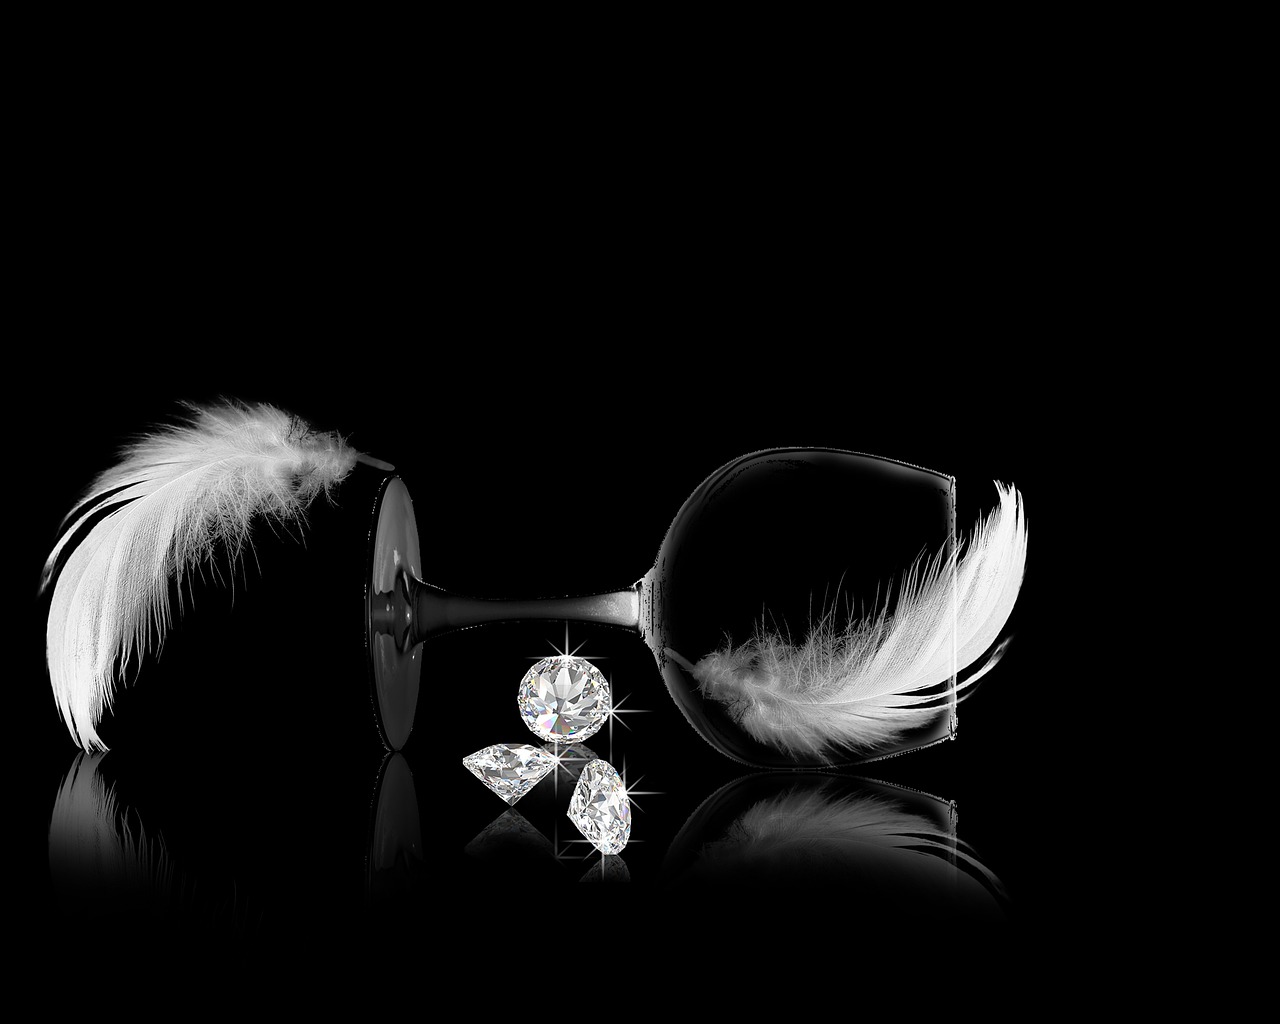 a pair of earrings sitting on top of a table, by Dimitre Manassiev Mehandjiysky, trending on cg society, wine glass, white feathers, diamond, 15081959 21121991 01012000 4k